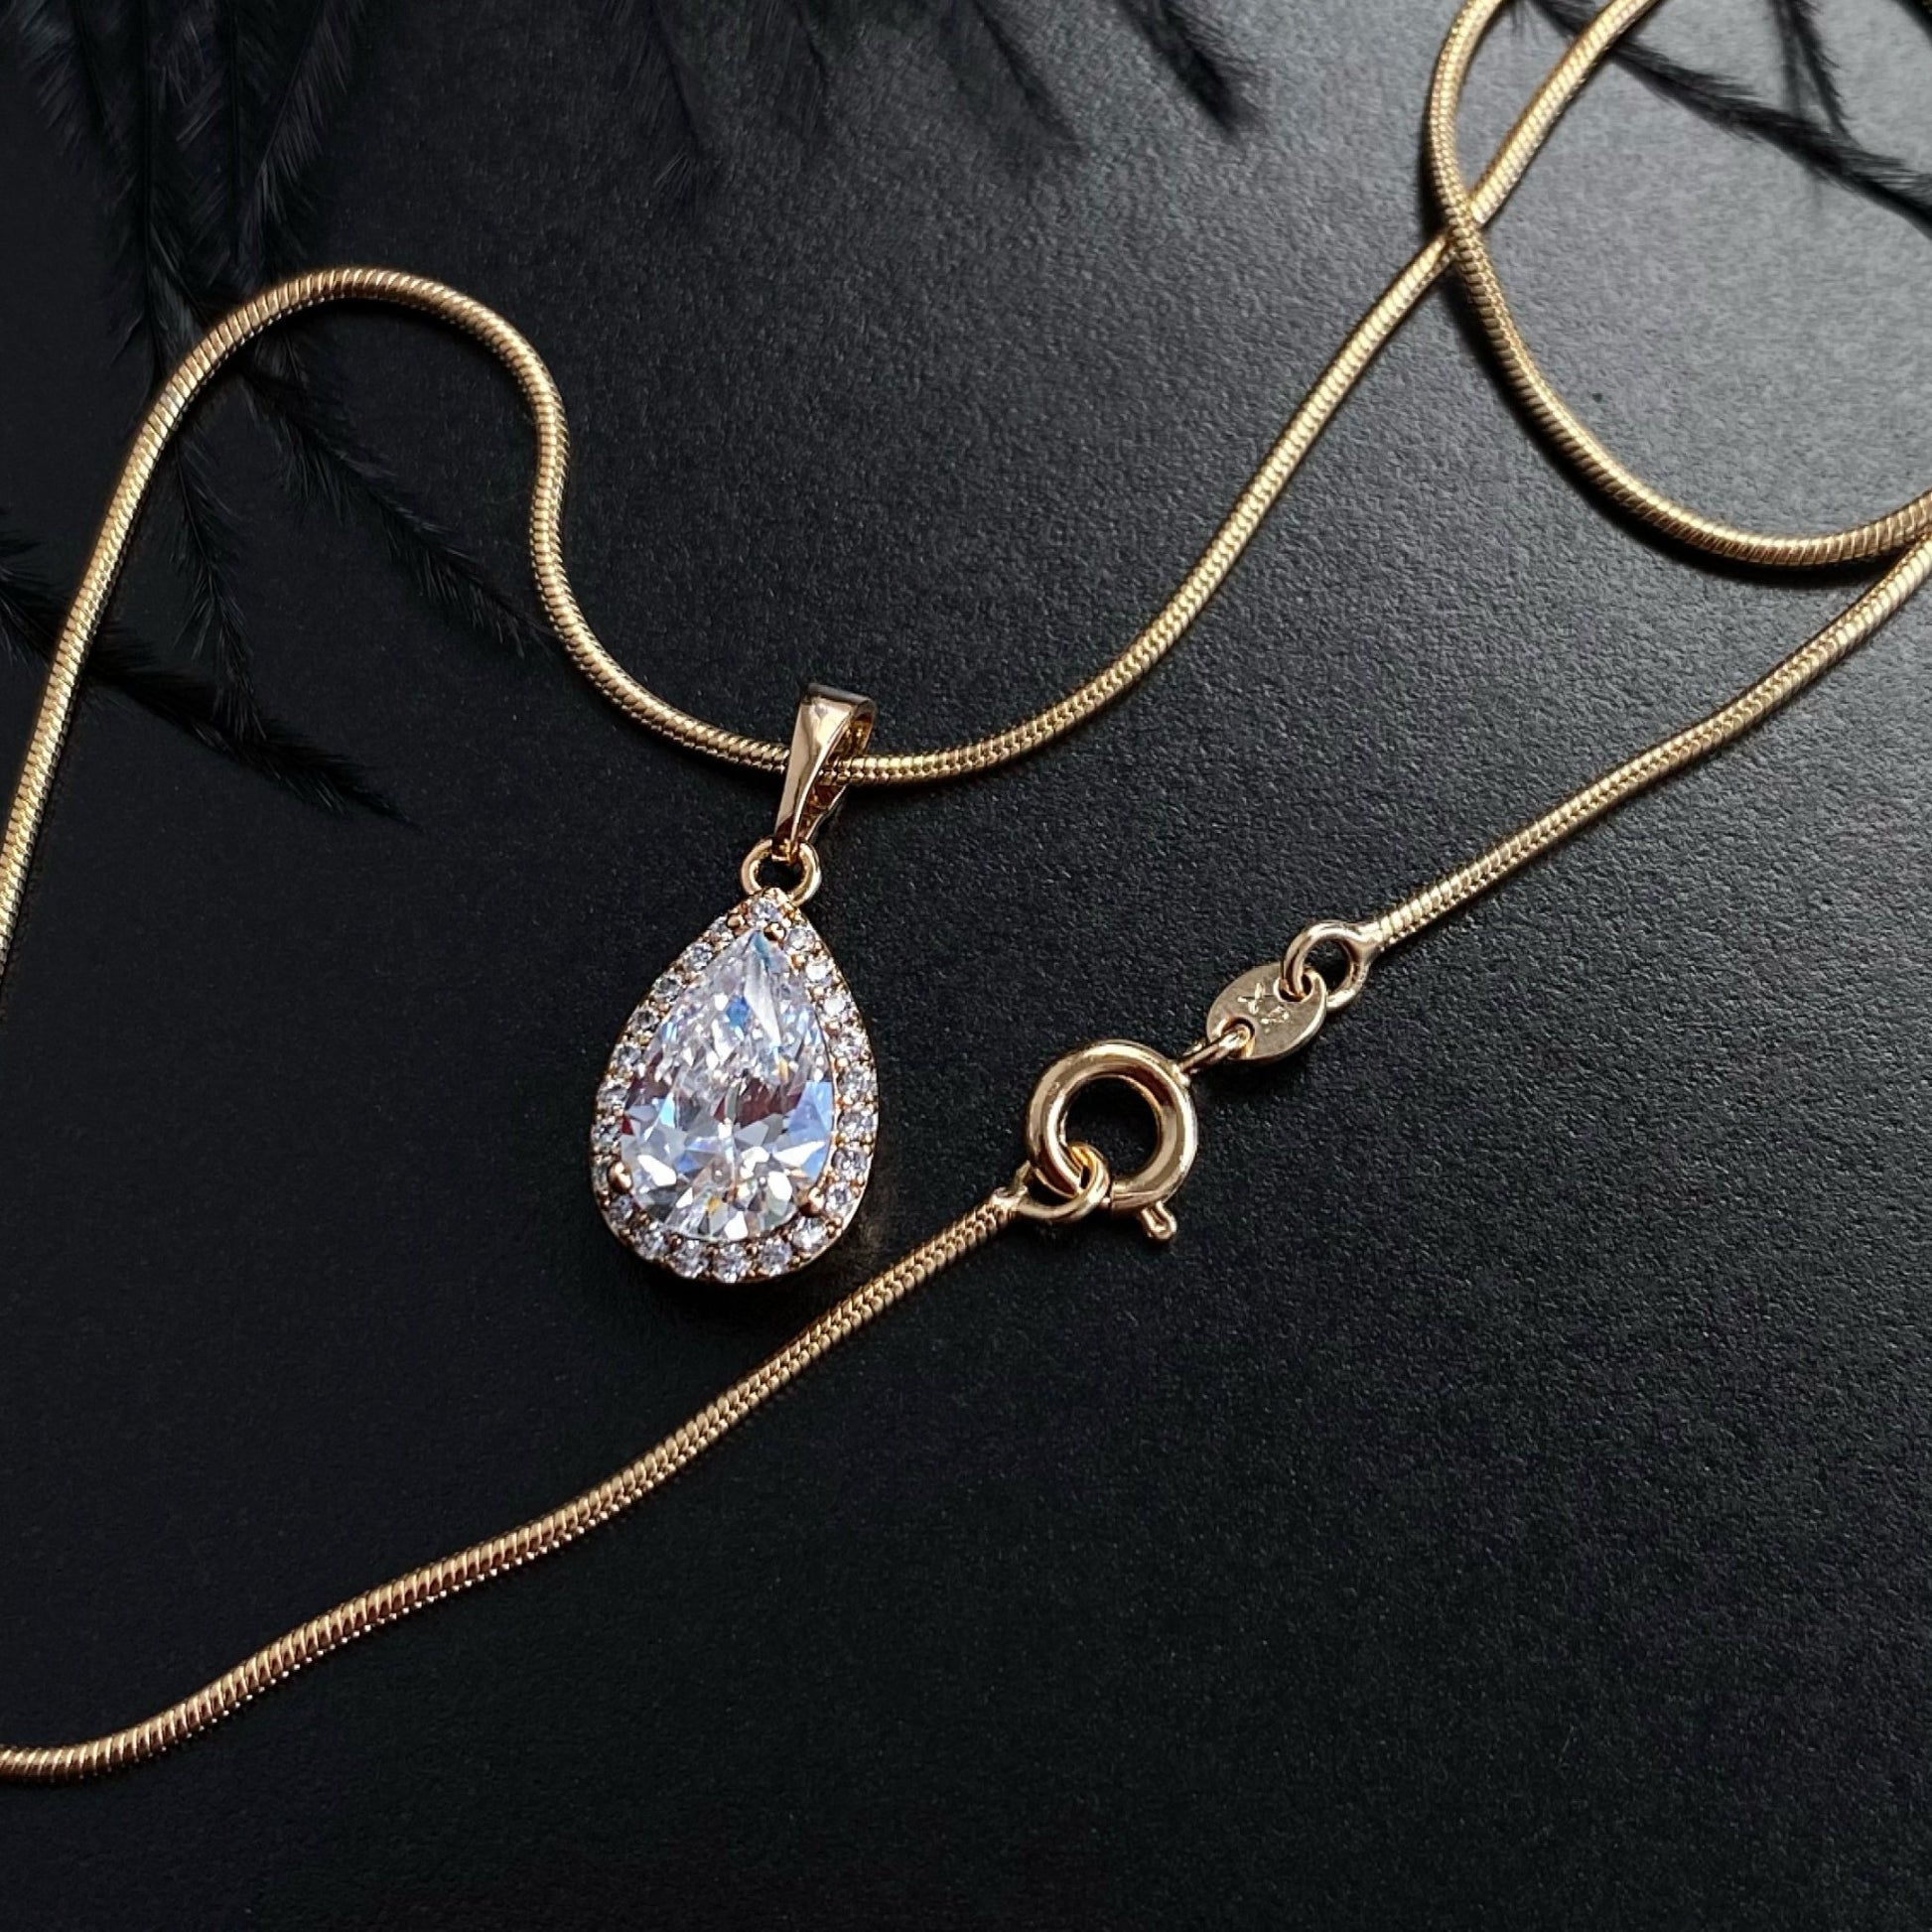 GOLD PLATED NECKLACE WITH DROP PENDANT